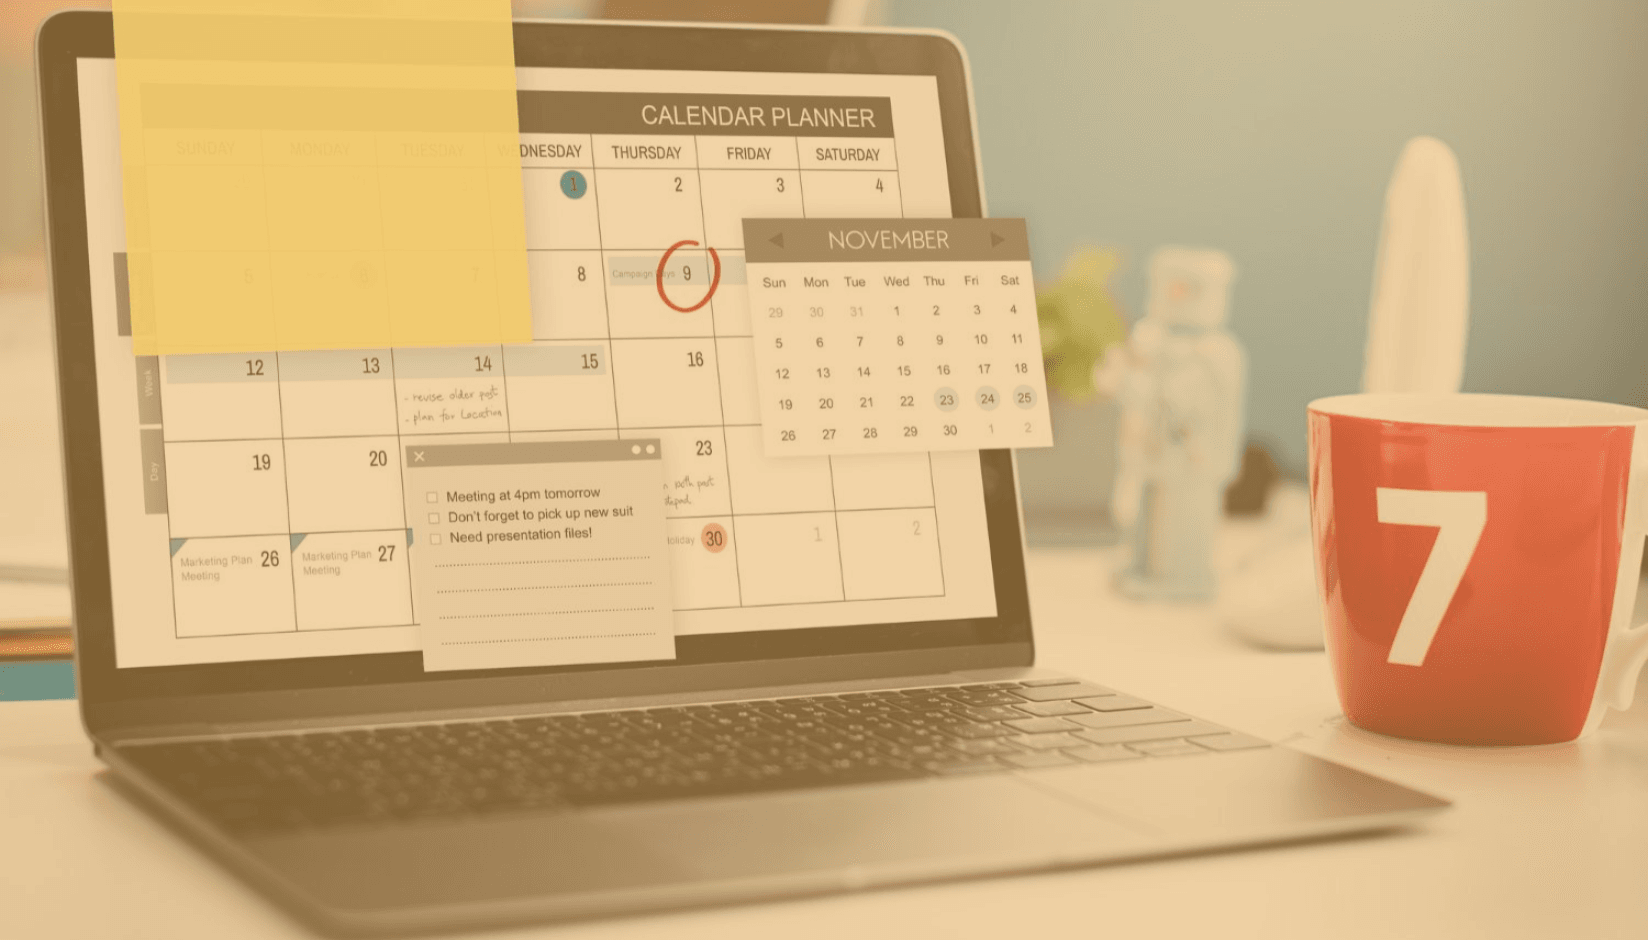 Open coworking space manager's laptop with Google Calendar on it